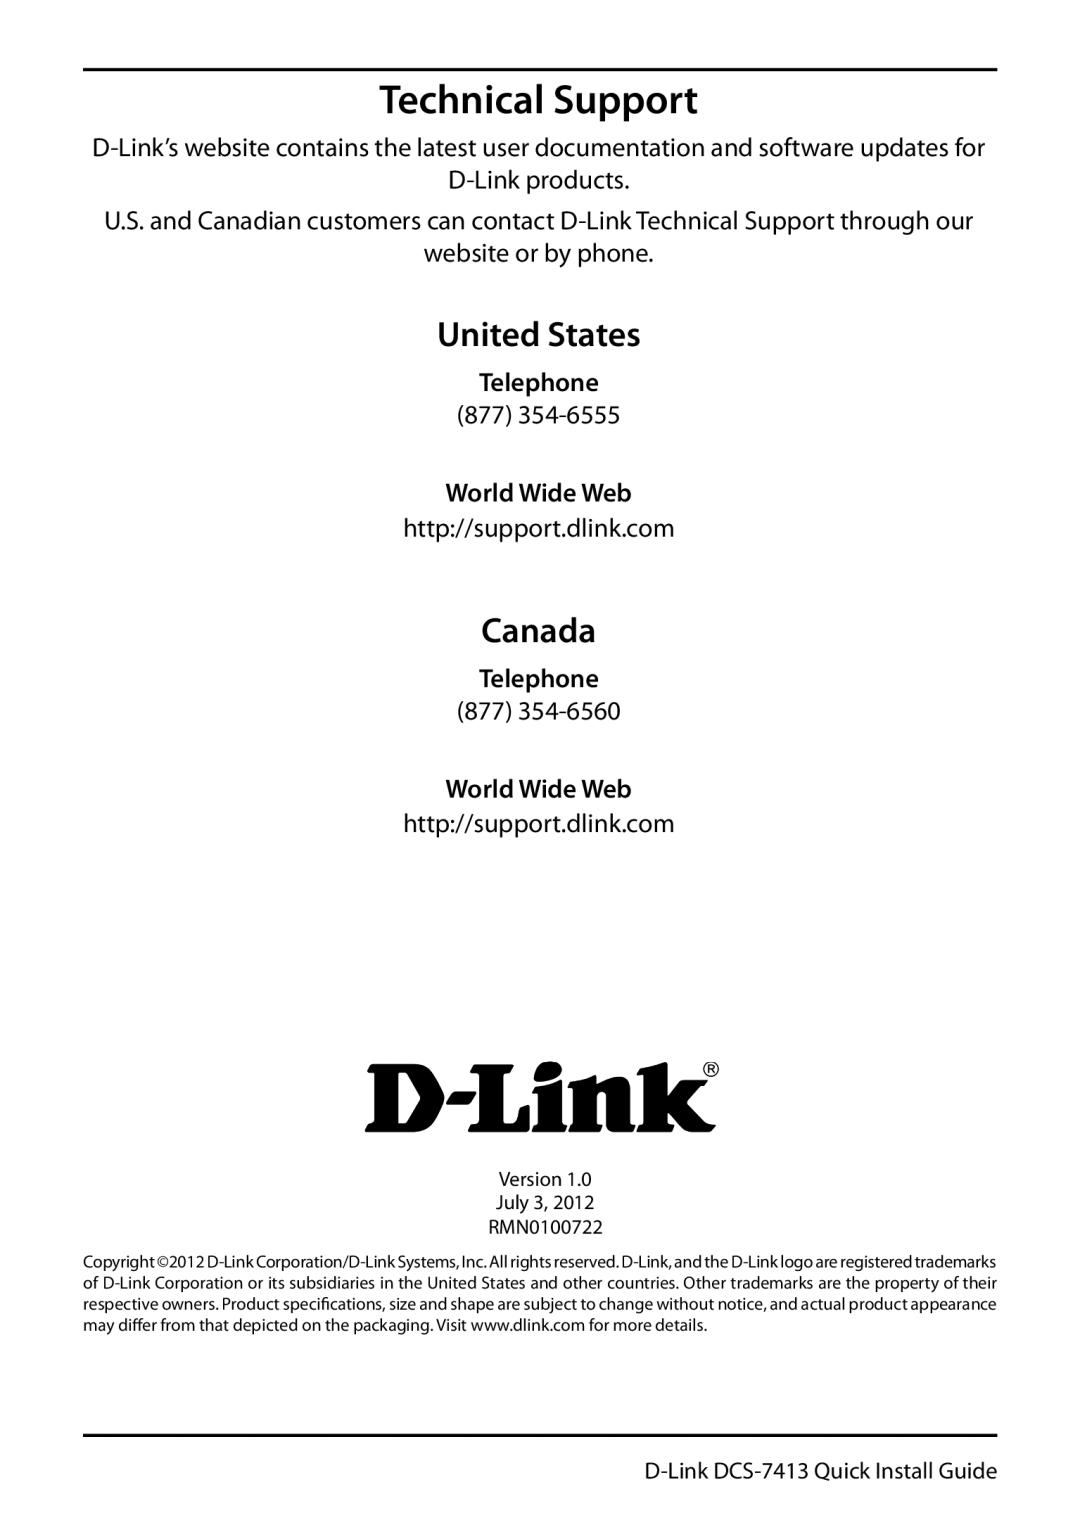 D-Link DCS-7413 Technical Support, United States, Canada, D-Link products, website or by phone, Telephone, World Wide Web 